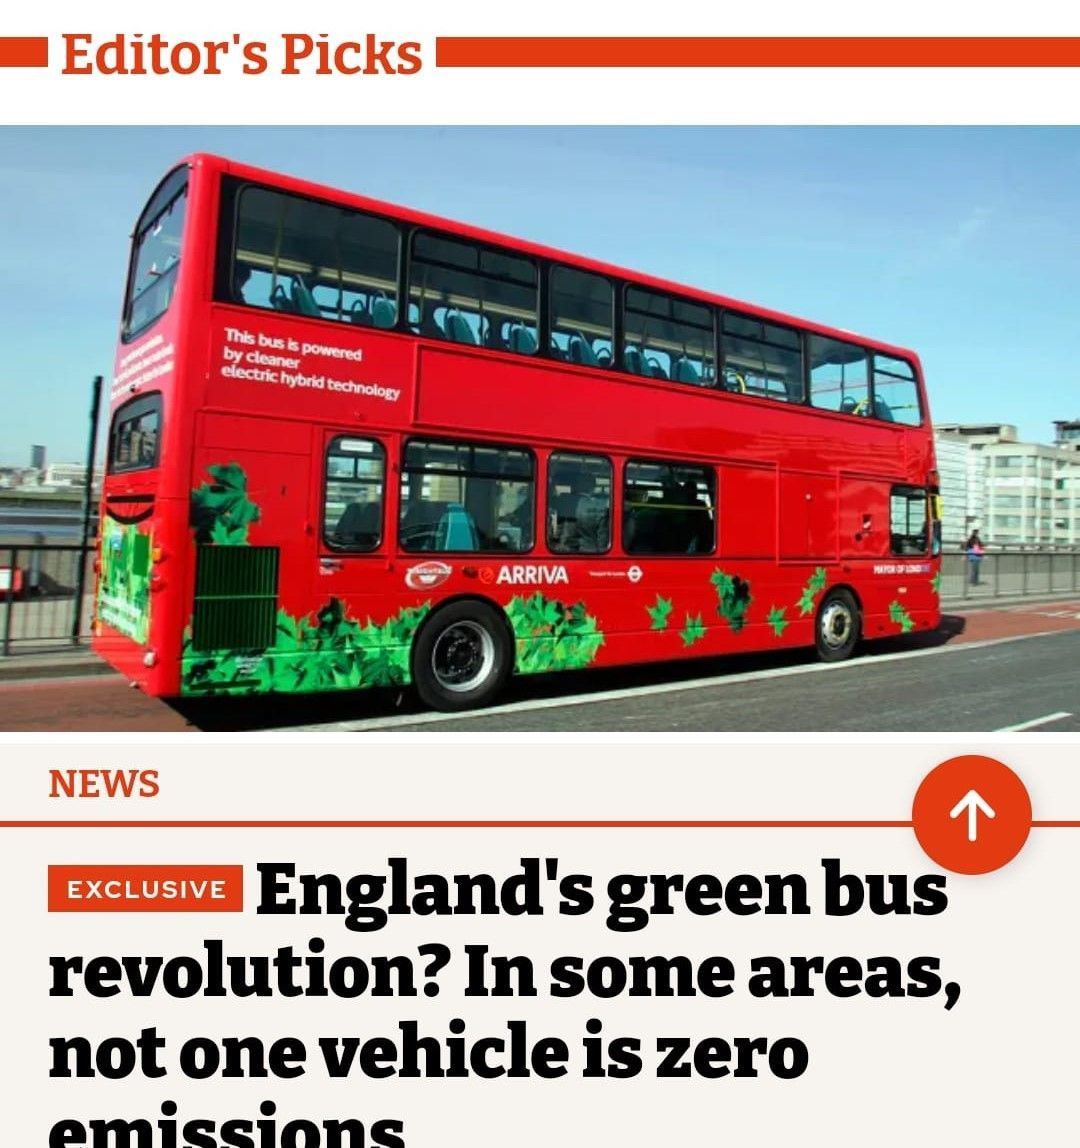 🚌 Our exclusive with the @theipaper is in today's Editor's Picks! Check out the full story at: buff.ly/3w4HBLI